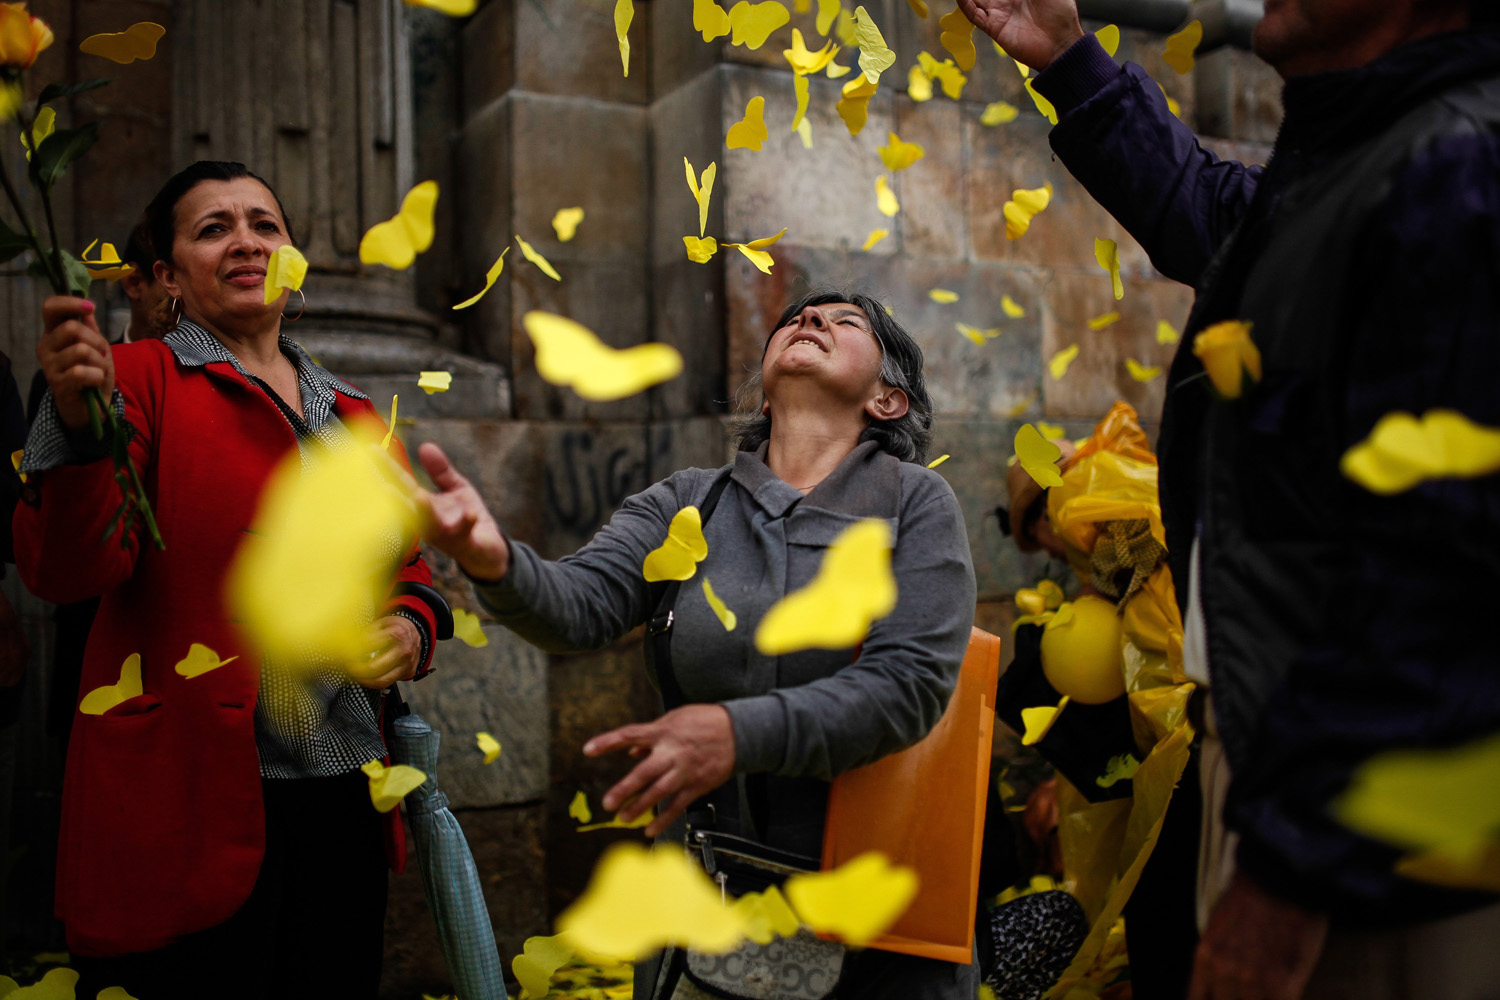 Apr. 22, 2014. Residents play with paper cut-outs of butterflies in front of the Primary Cathedral during the homage of the late Latin American writer Gabriel Garcia Marquez in Bogota, Colombia.